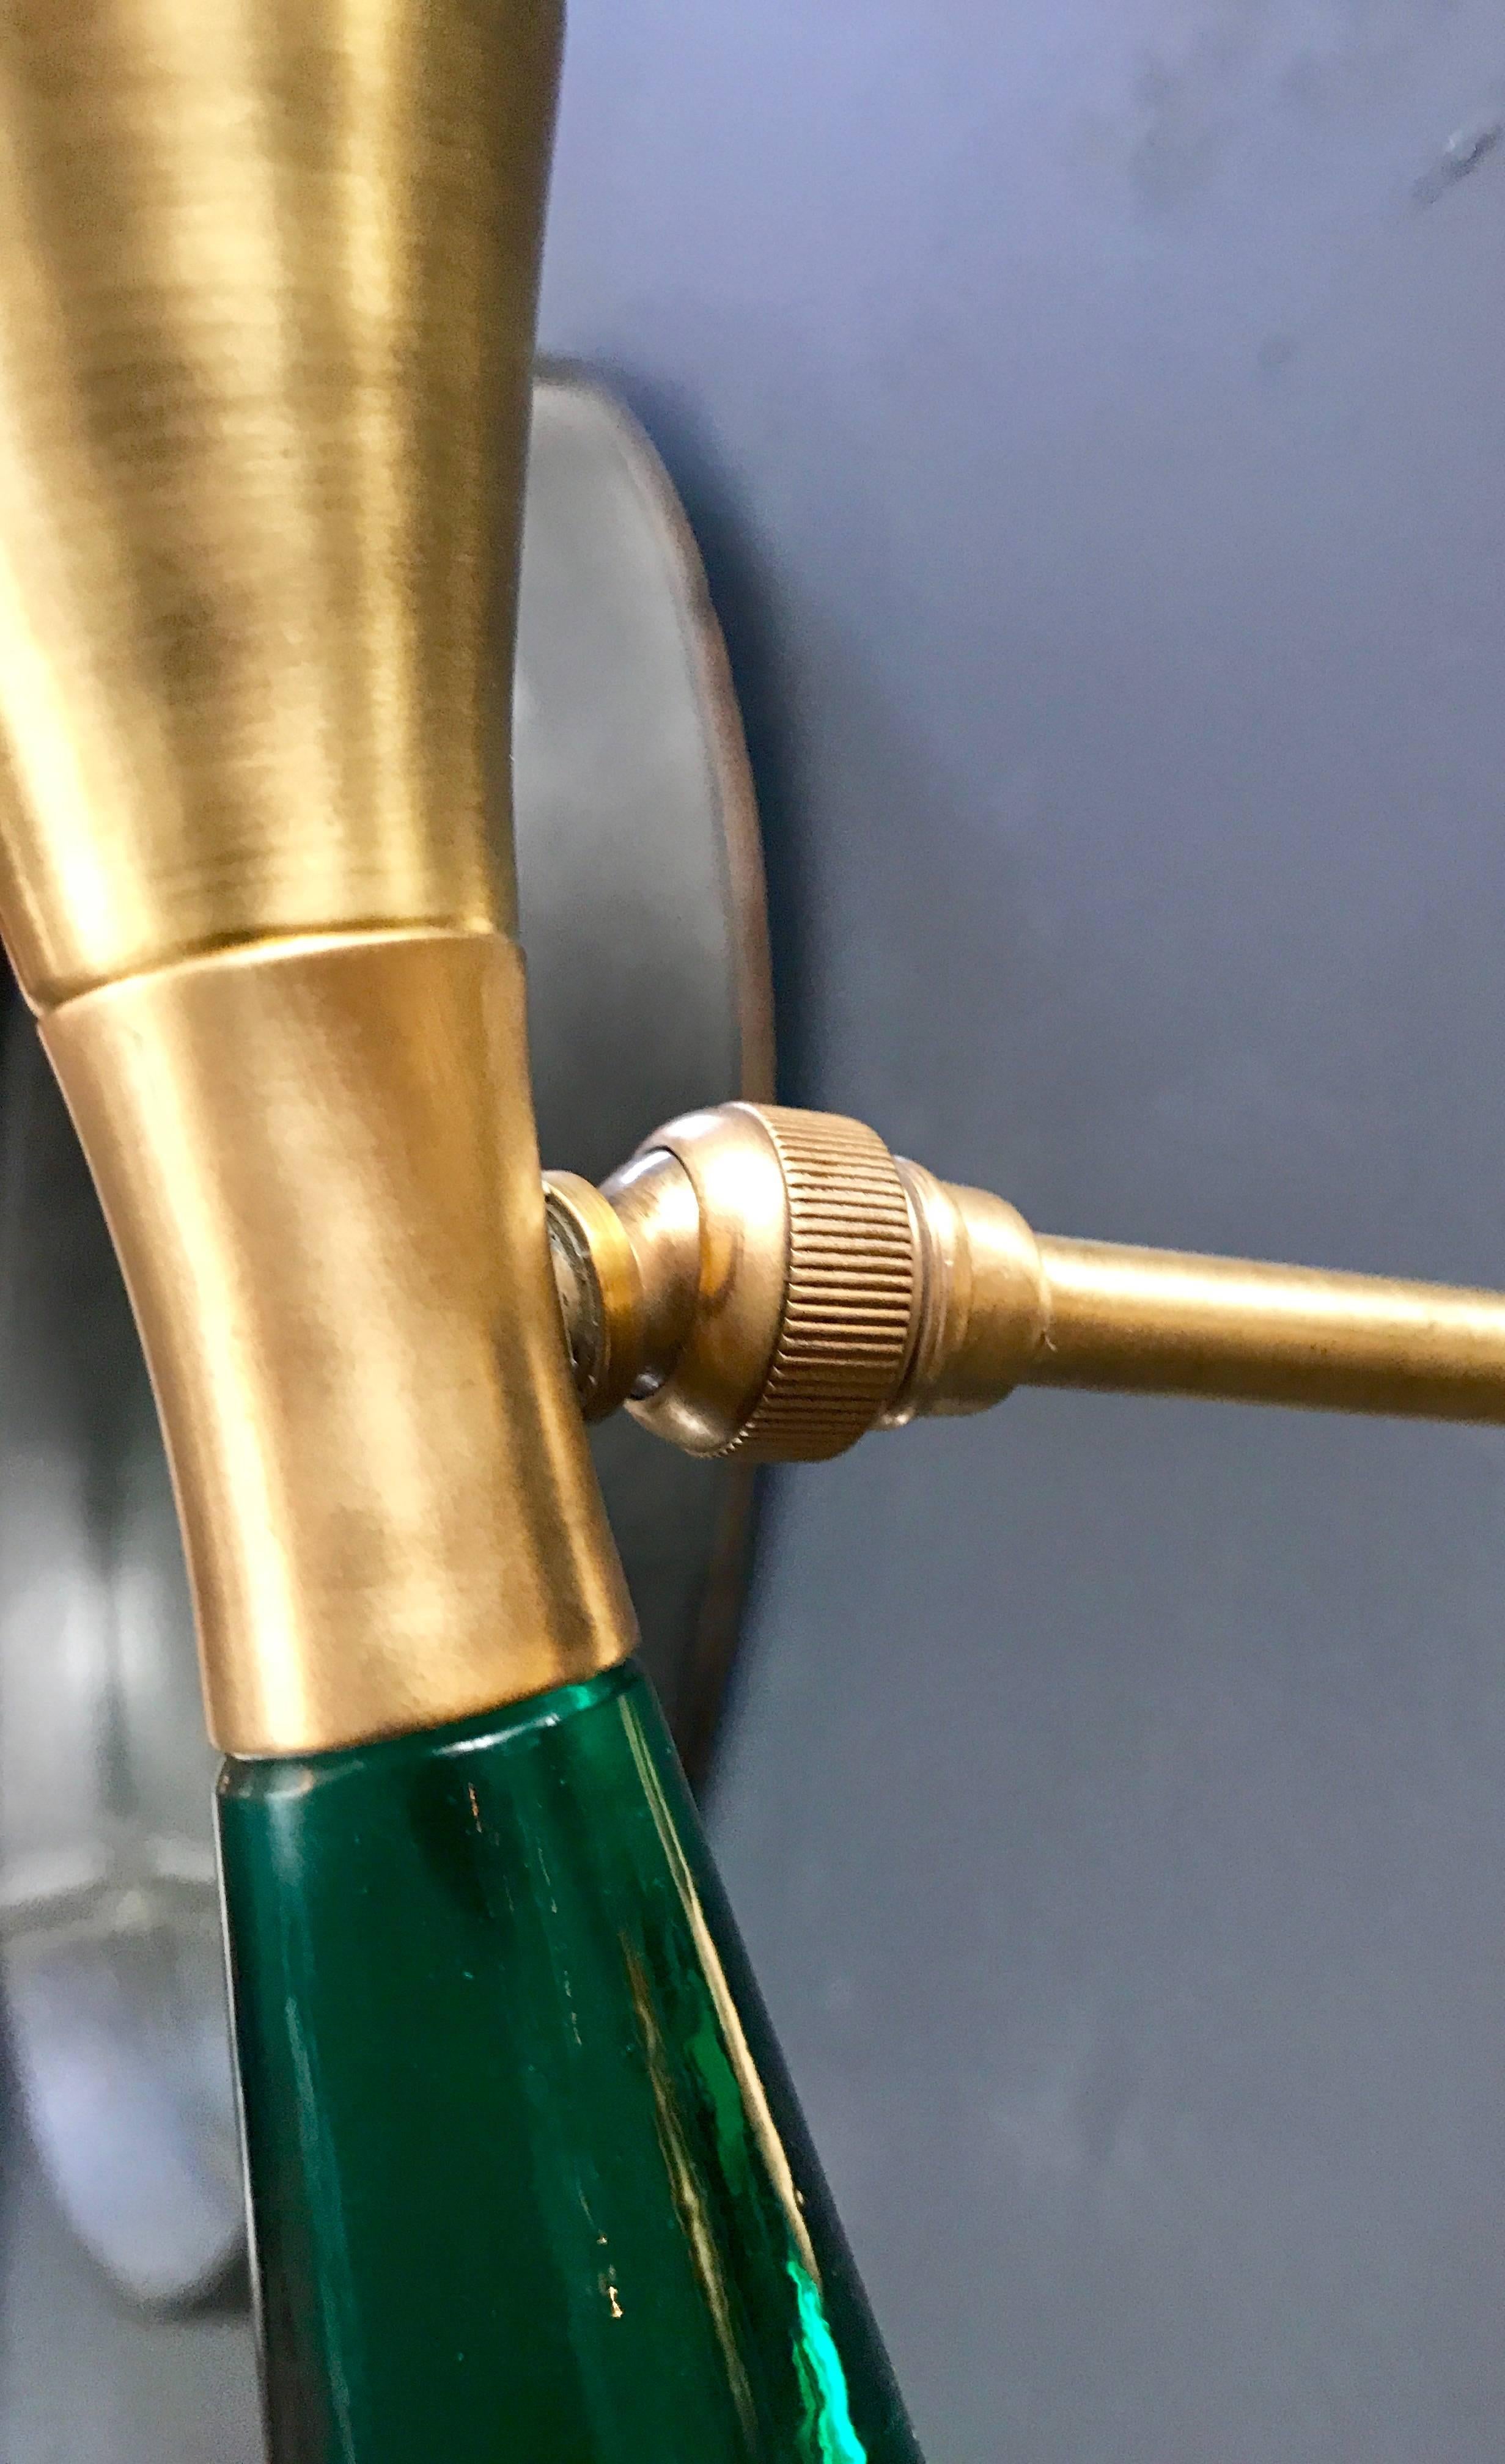 Mid-20th Century Sconces in Brass with Satin Glass Cone and More Solid Green Glass on the Base